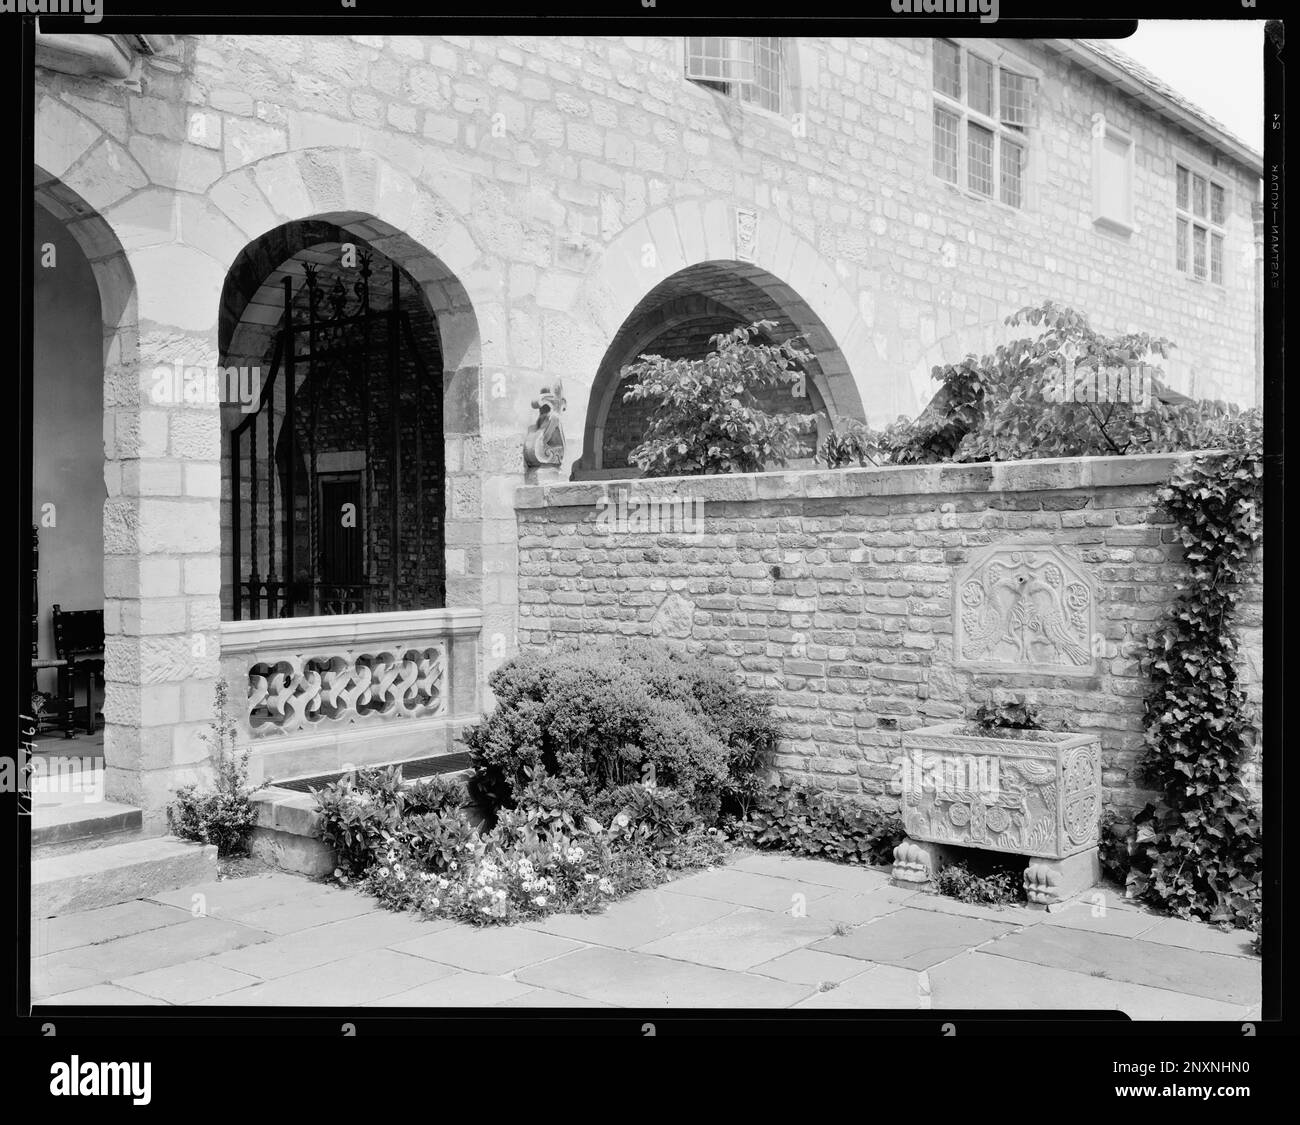 Virginia House, Richmond, Henrico County, Virginia. Carnegie Survey of the Architecture of the South. United States  Virginia  Henrico County  Richmond, Plant containers, Garden walls, Brickwork, Mansions. Stock Photo